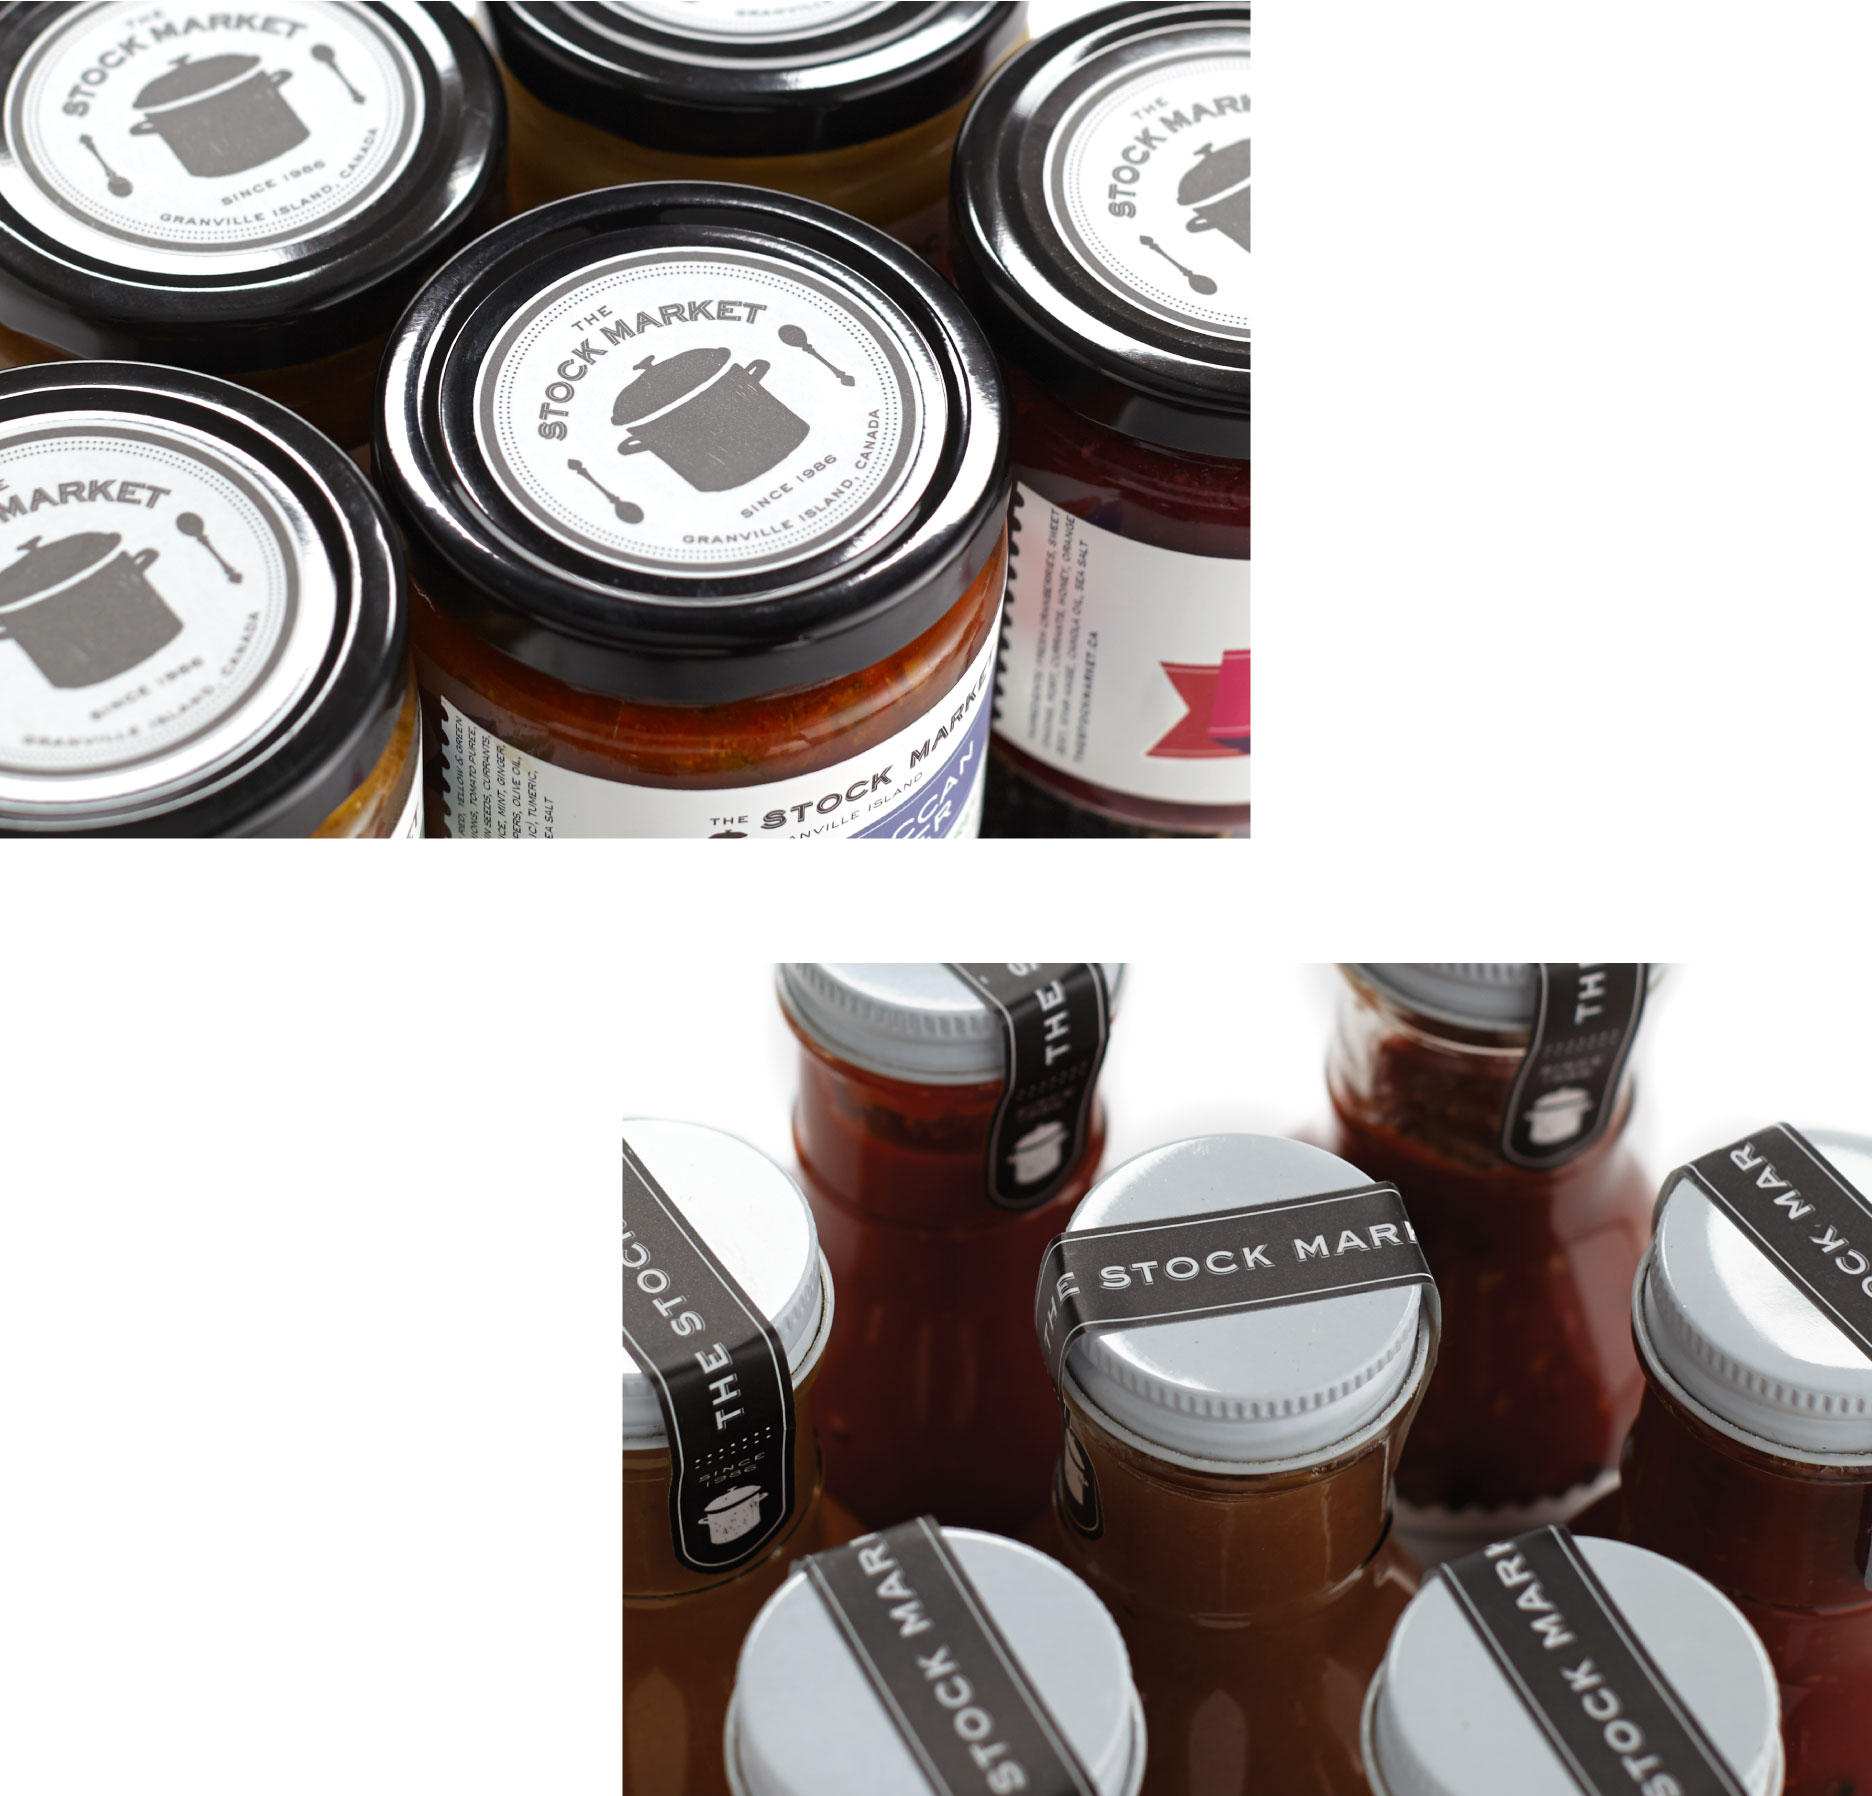 Bottle and can packaging labels for Heritage Food & Beverage Brand, Stock Market on Granville Island